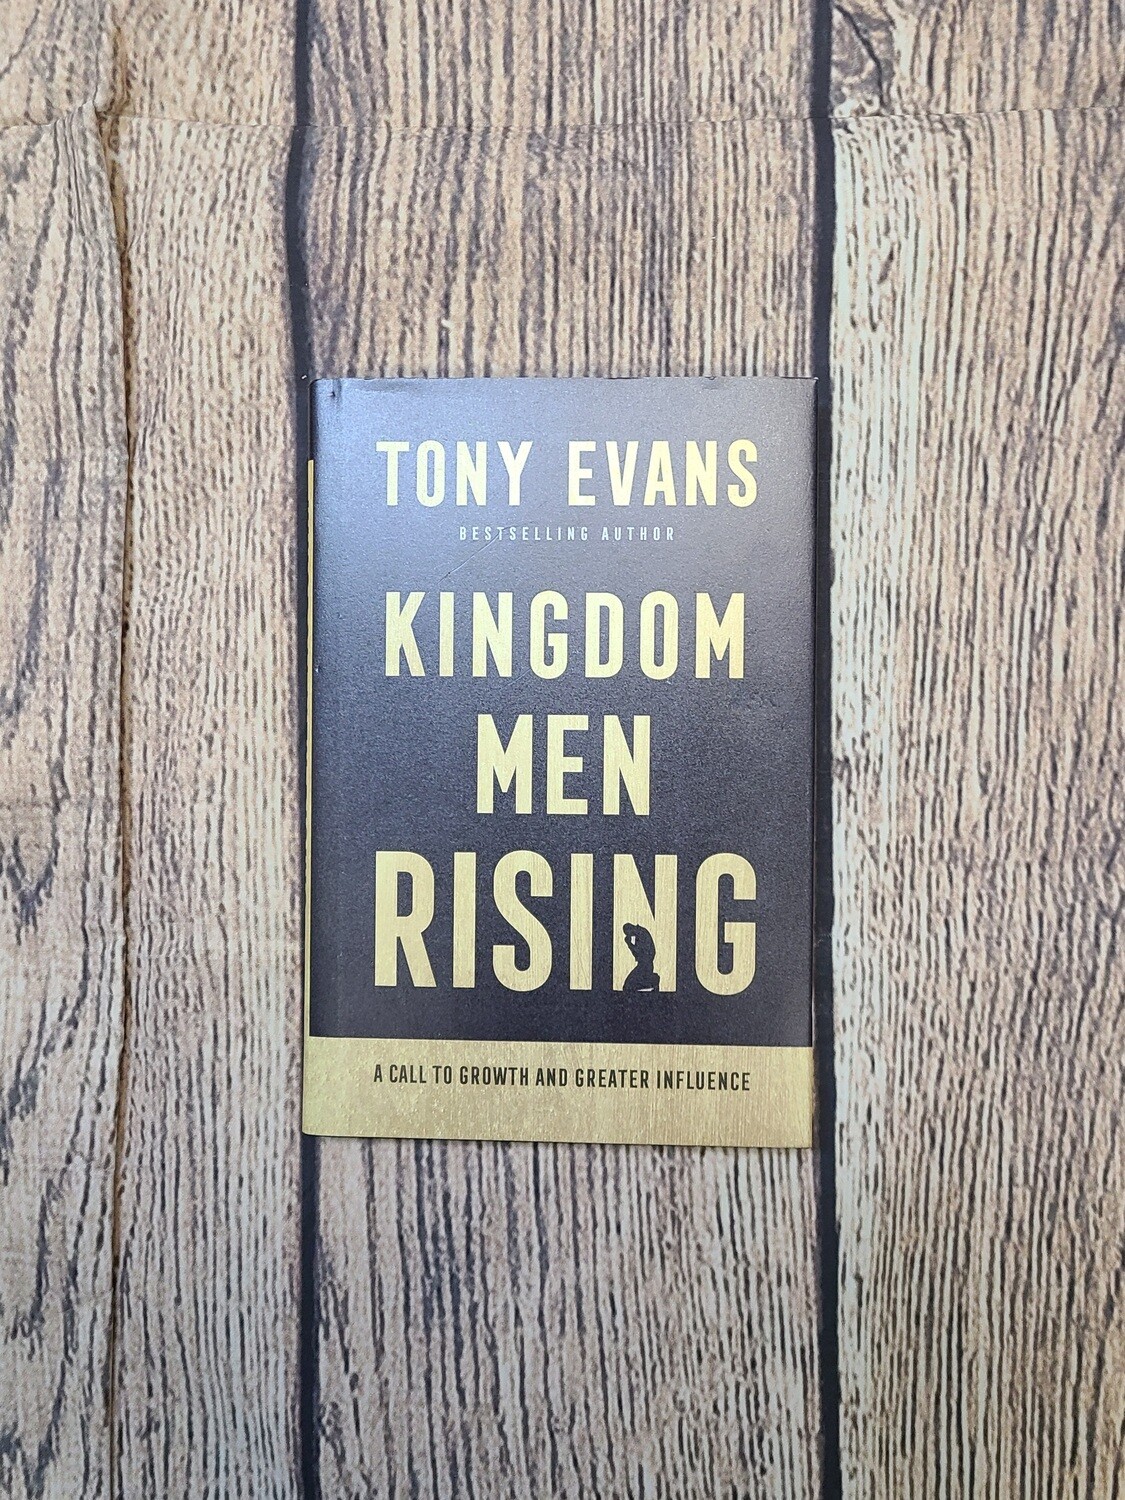 Kingdom Men Rising: A Call to Growth and Greater Influence by Tony Evans